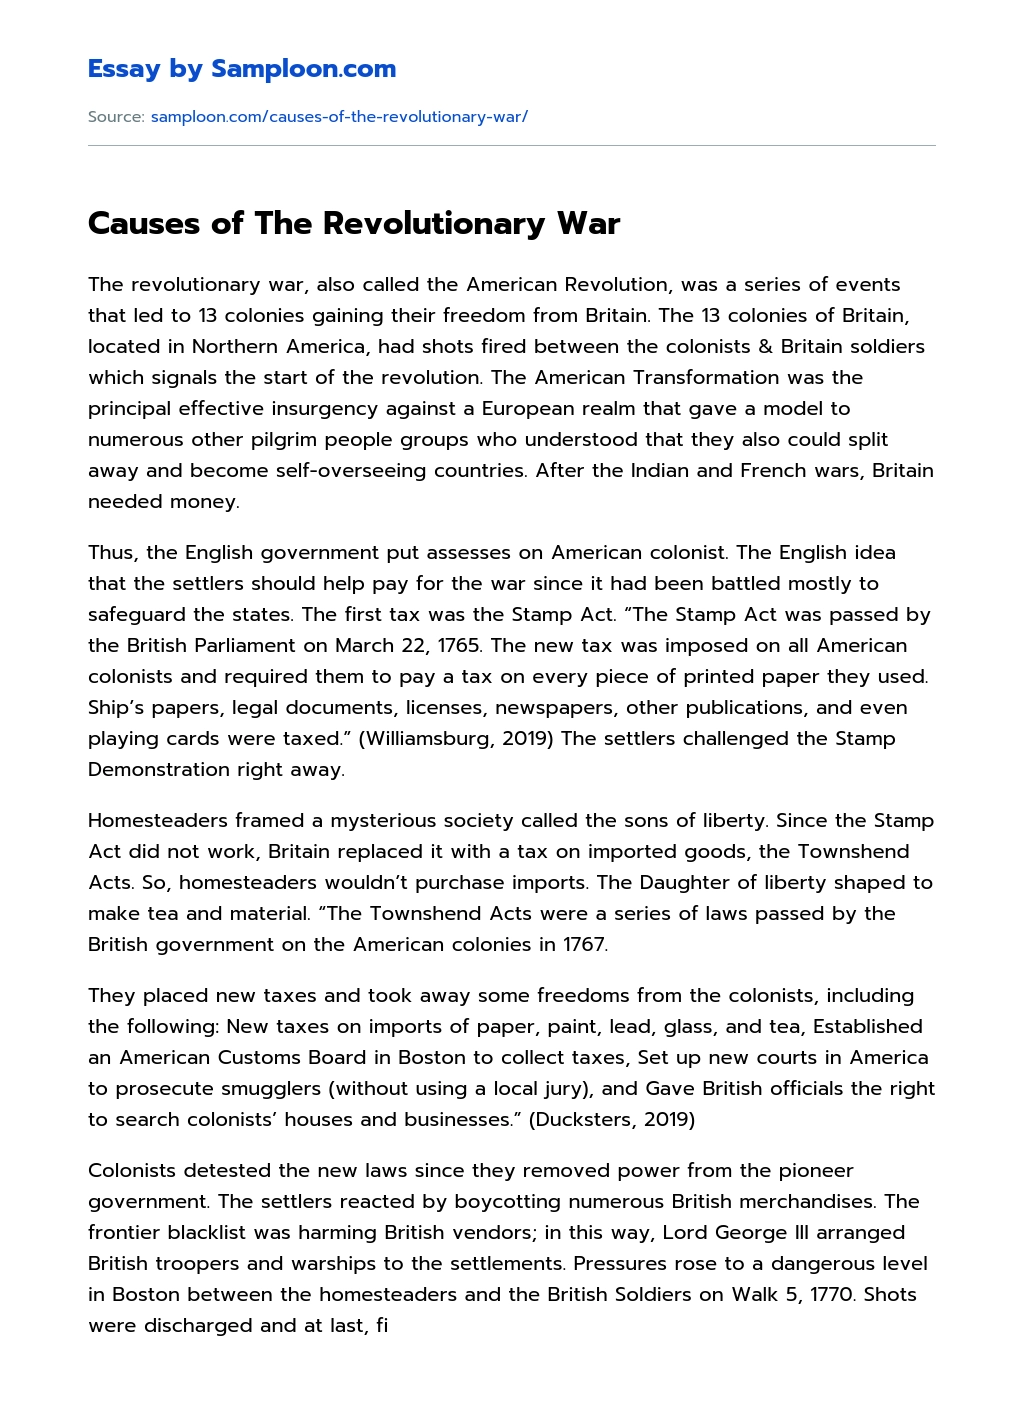 what were the causes of the revolutionary war essay